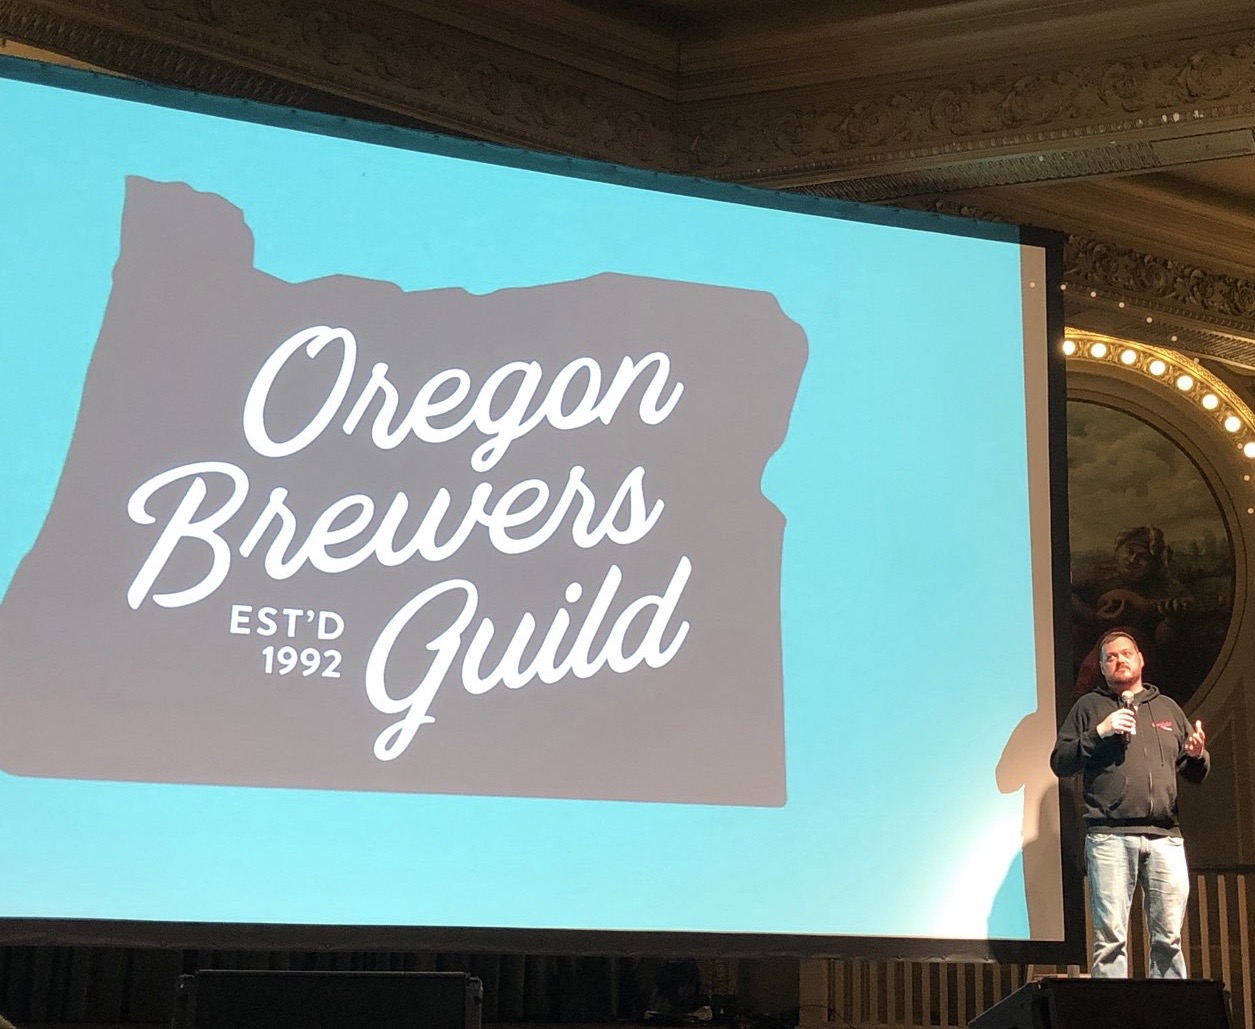 Dan Engler, President of the Oregon Brewers Guild at the 2020 OBG Annual Meeting.